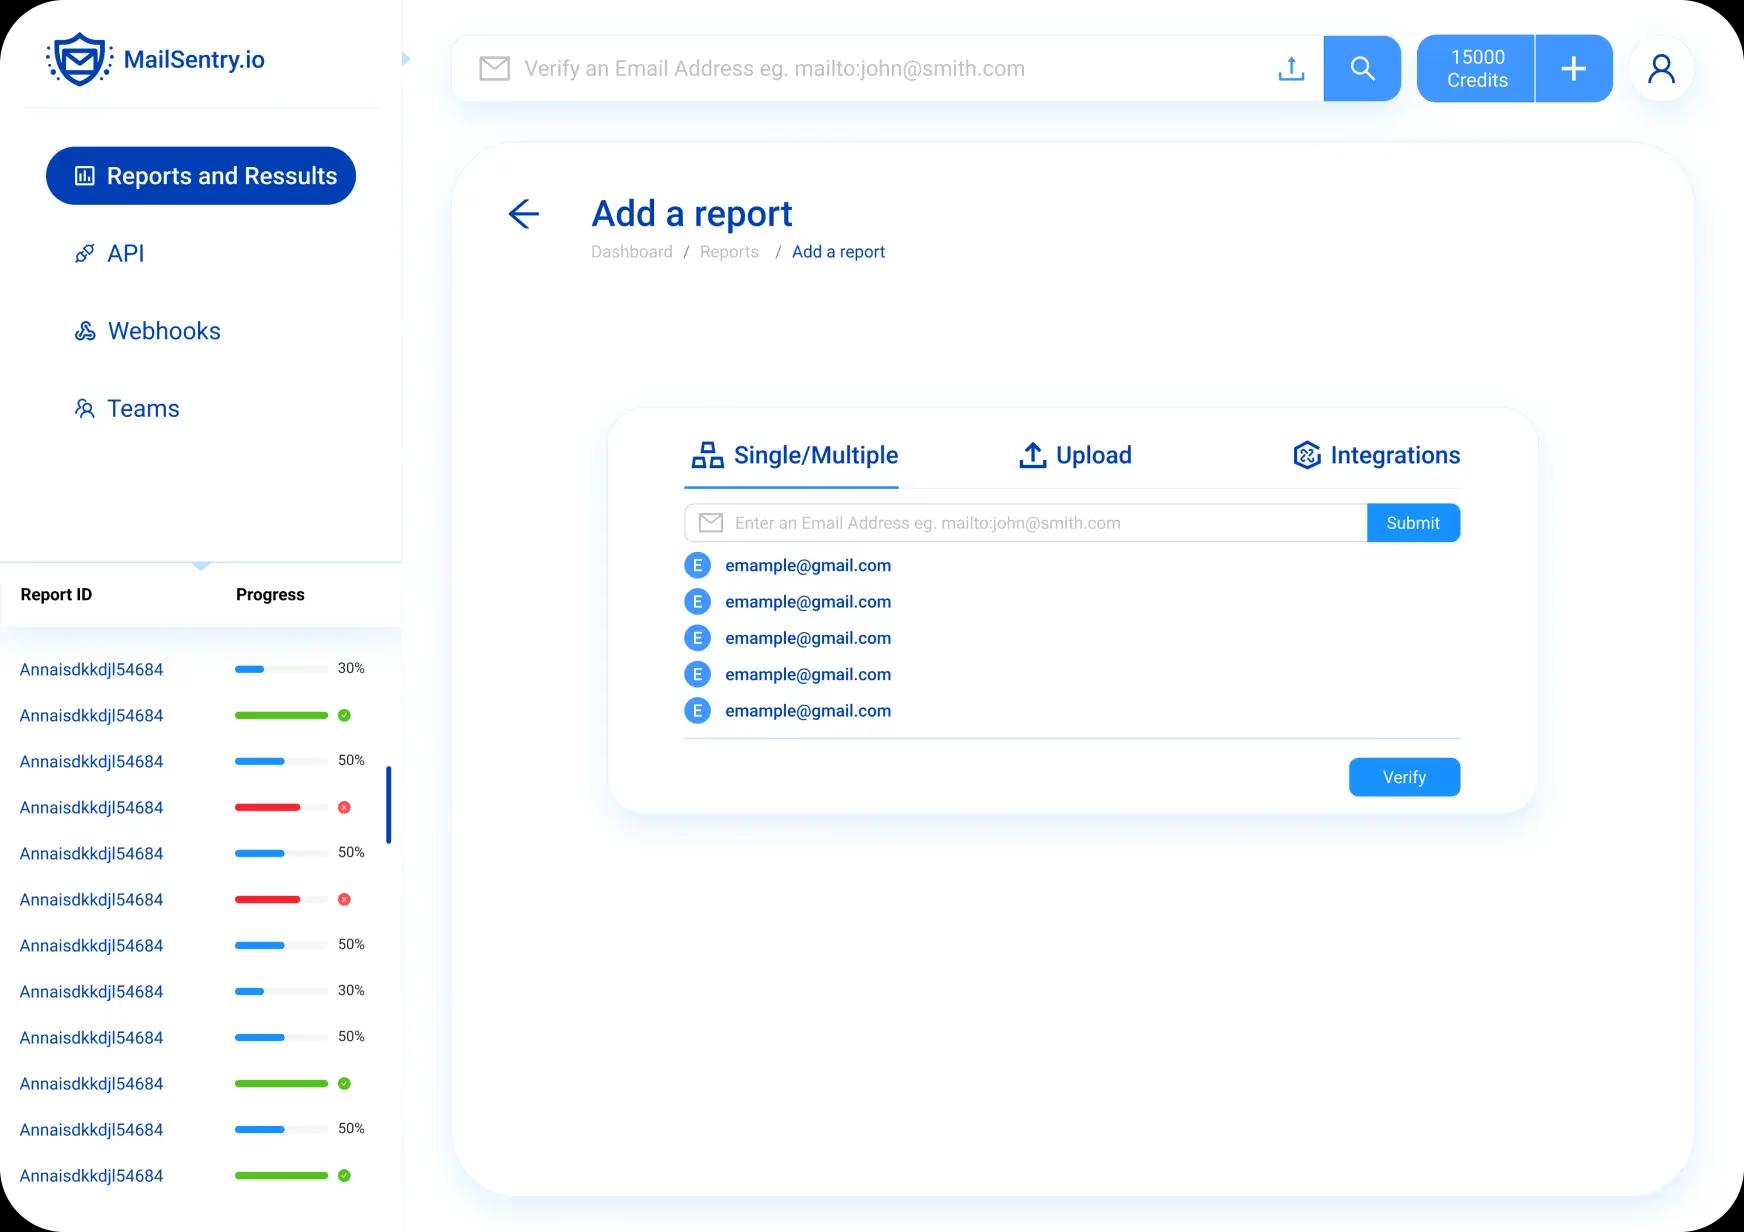 MailSentry's user-friendly platform for verifying single emails or conducting bulk email validation